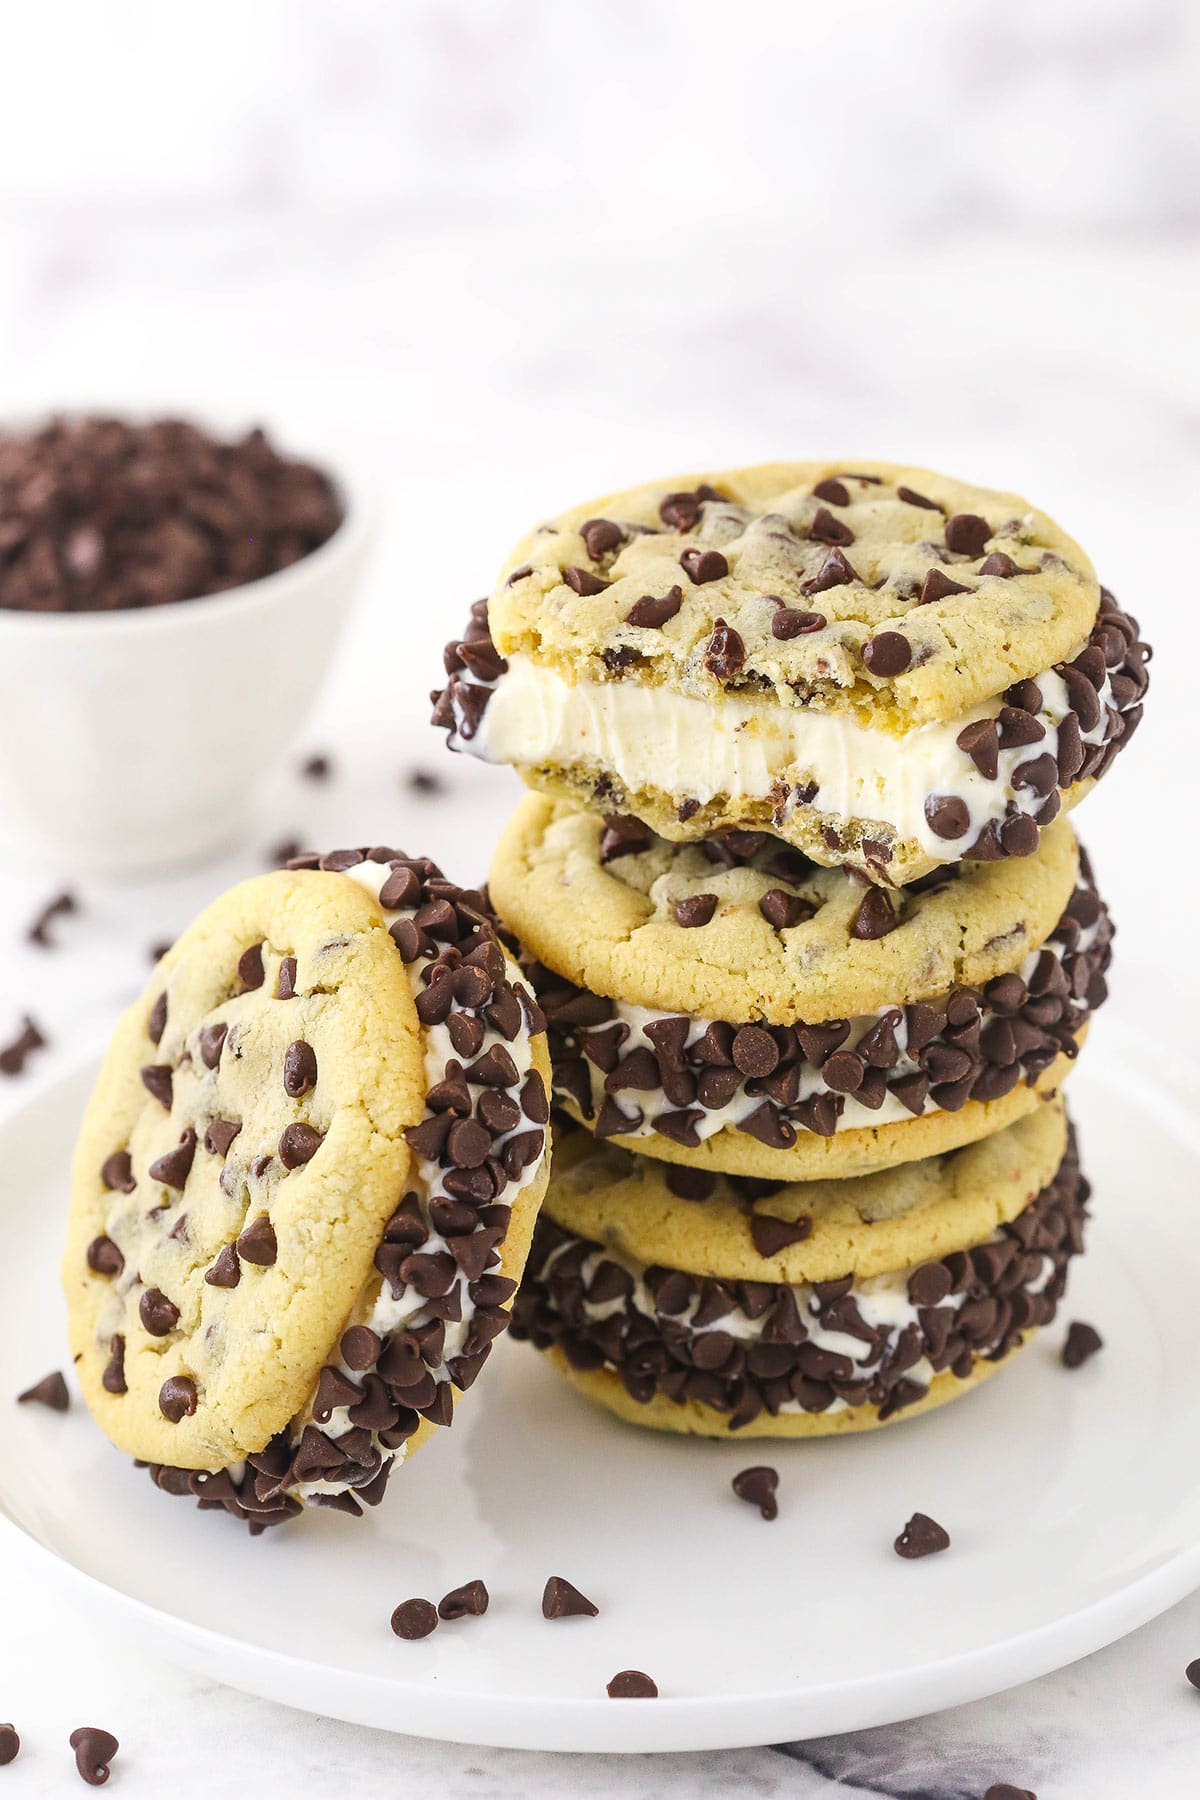 Three ice cream cookie sandwiches stacked on top of one another with a fourth one leaning against the stack